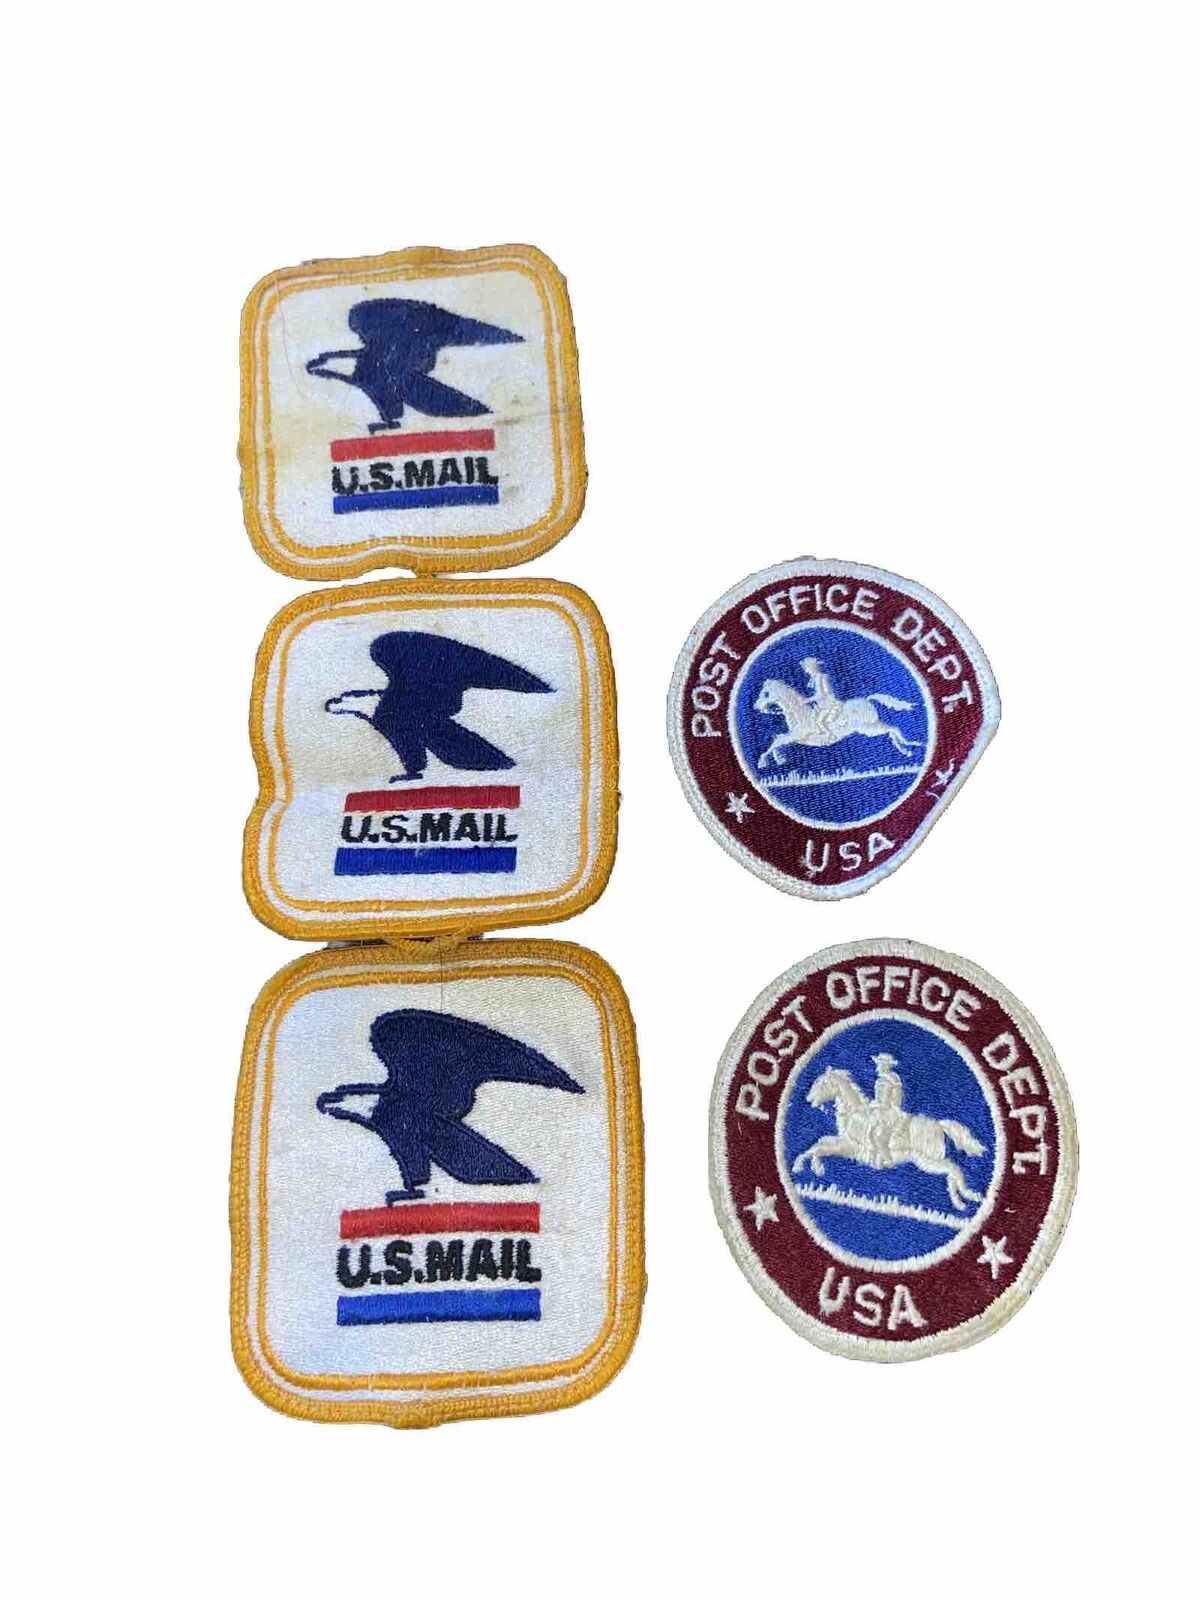 Lot of 5 US Mail Post Office Eagle Patches Vintage USA Horseback Rider